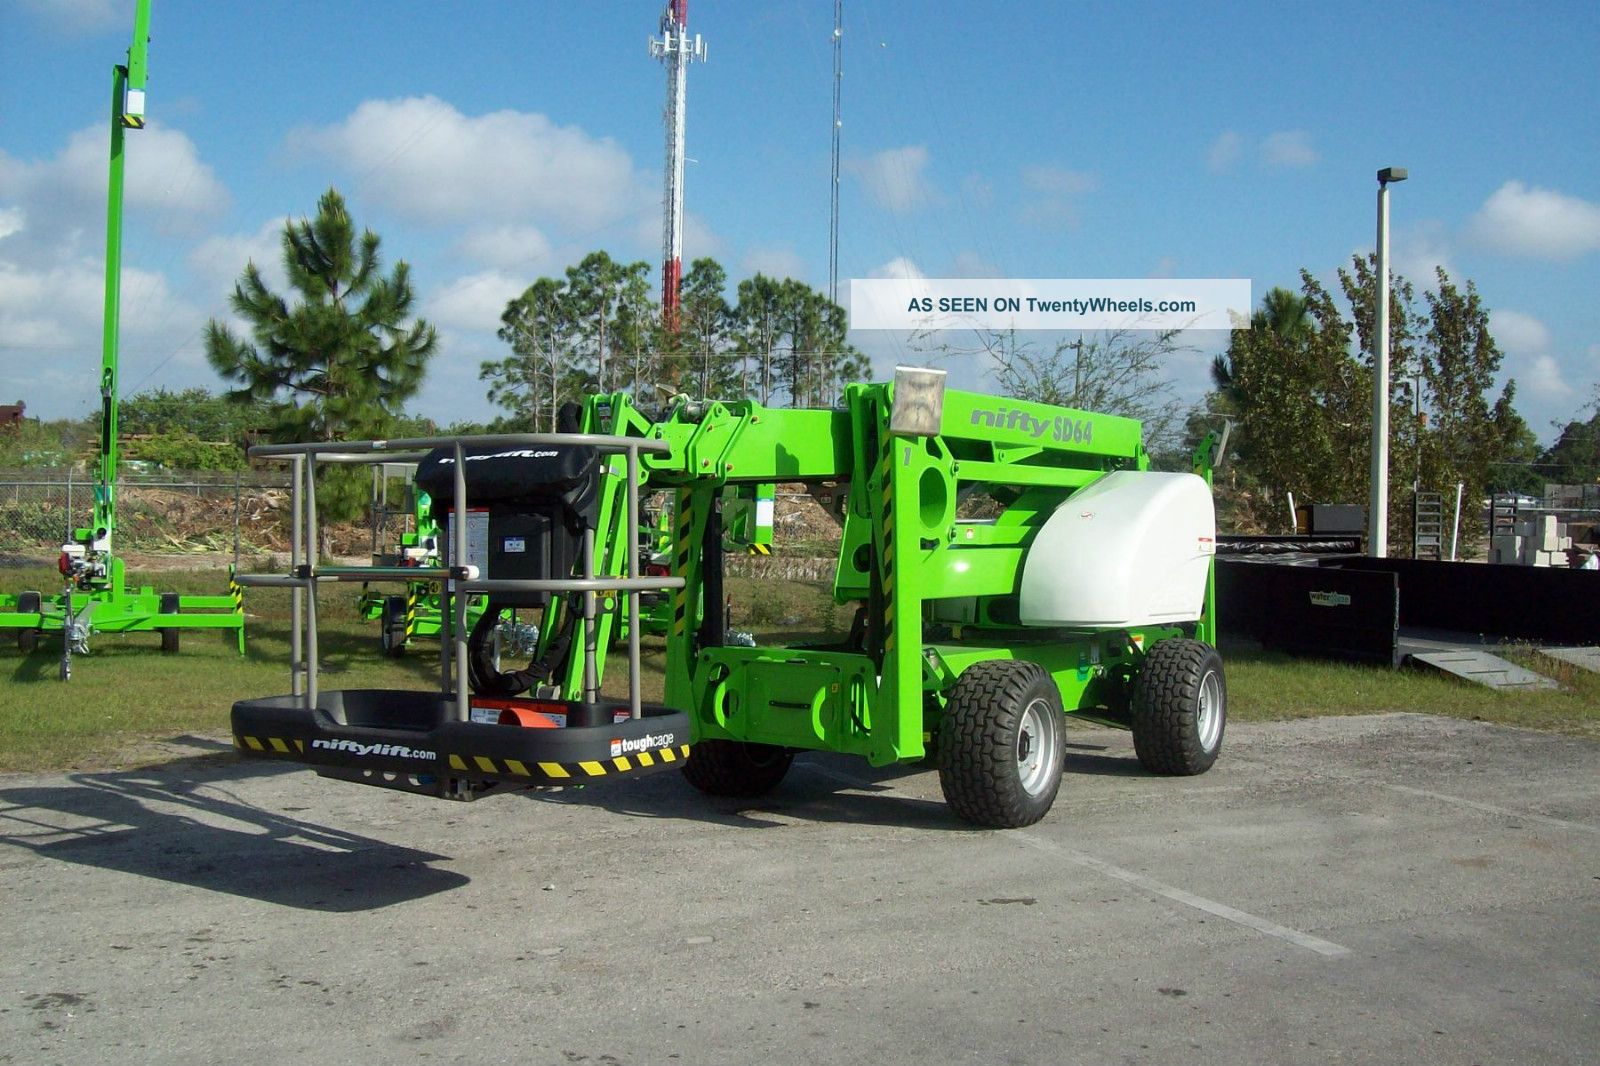 Nifty Sd64 70 ' Boom Lift,  4wd,  Only Weighs 8700 Lbs,  4 Wheel Steer,  Crab Steer,  New Lifts photo